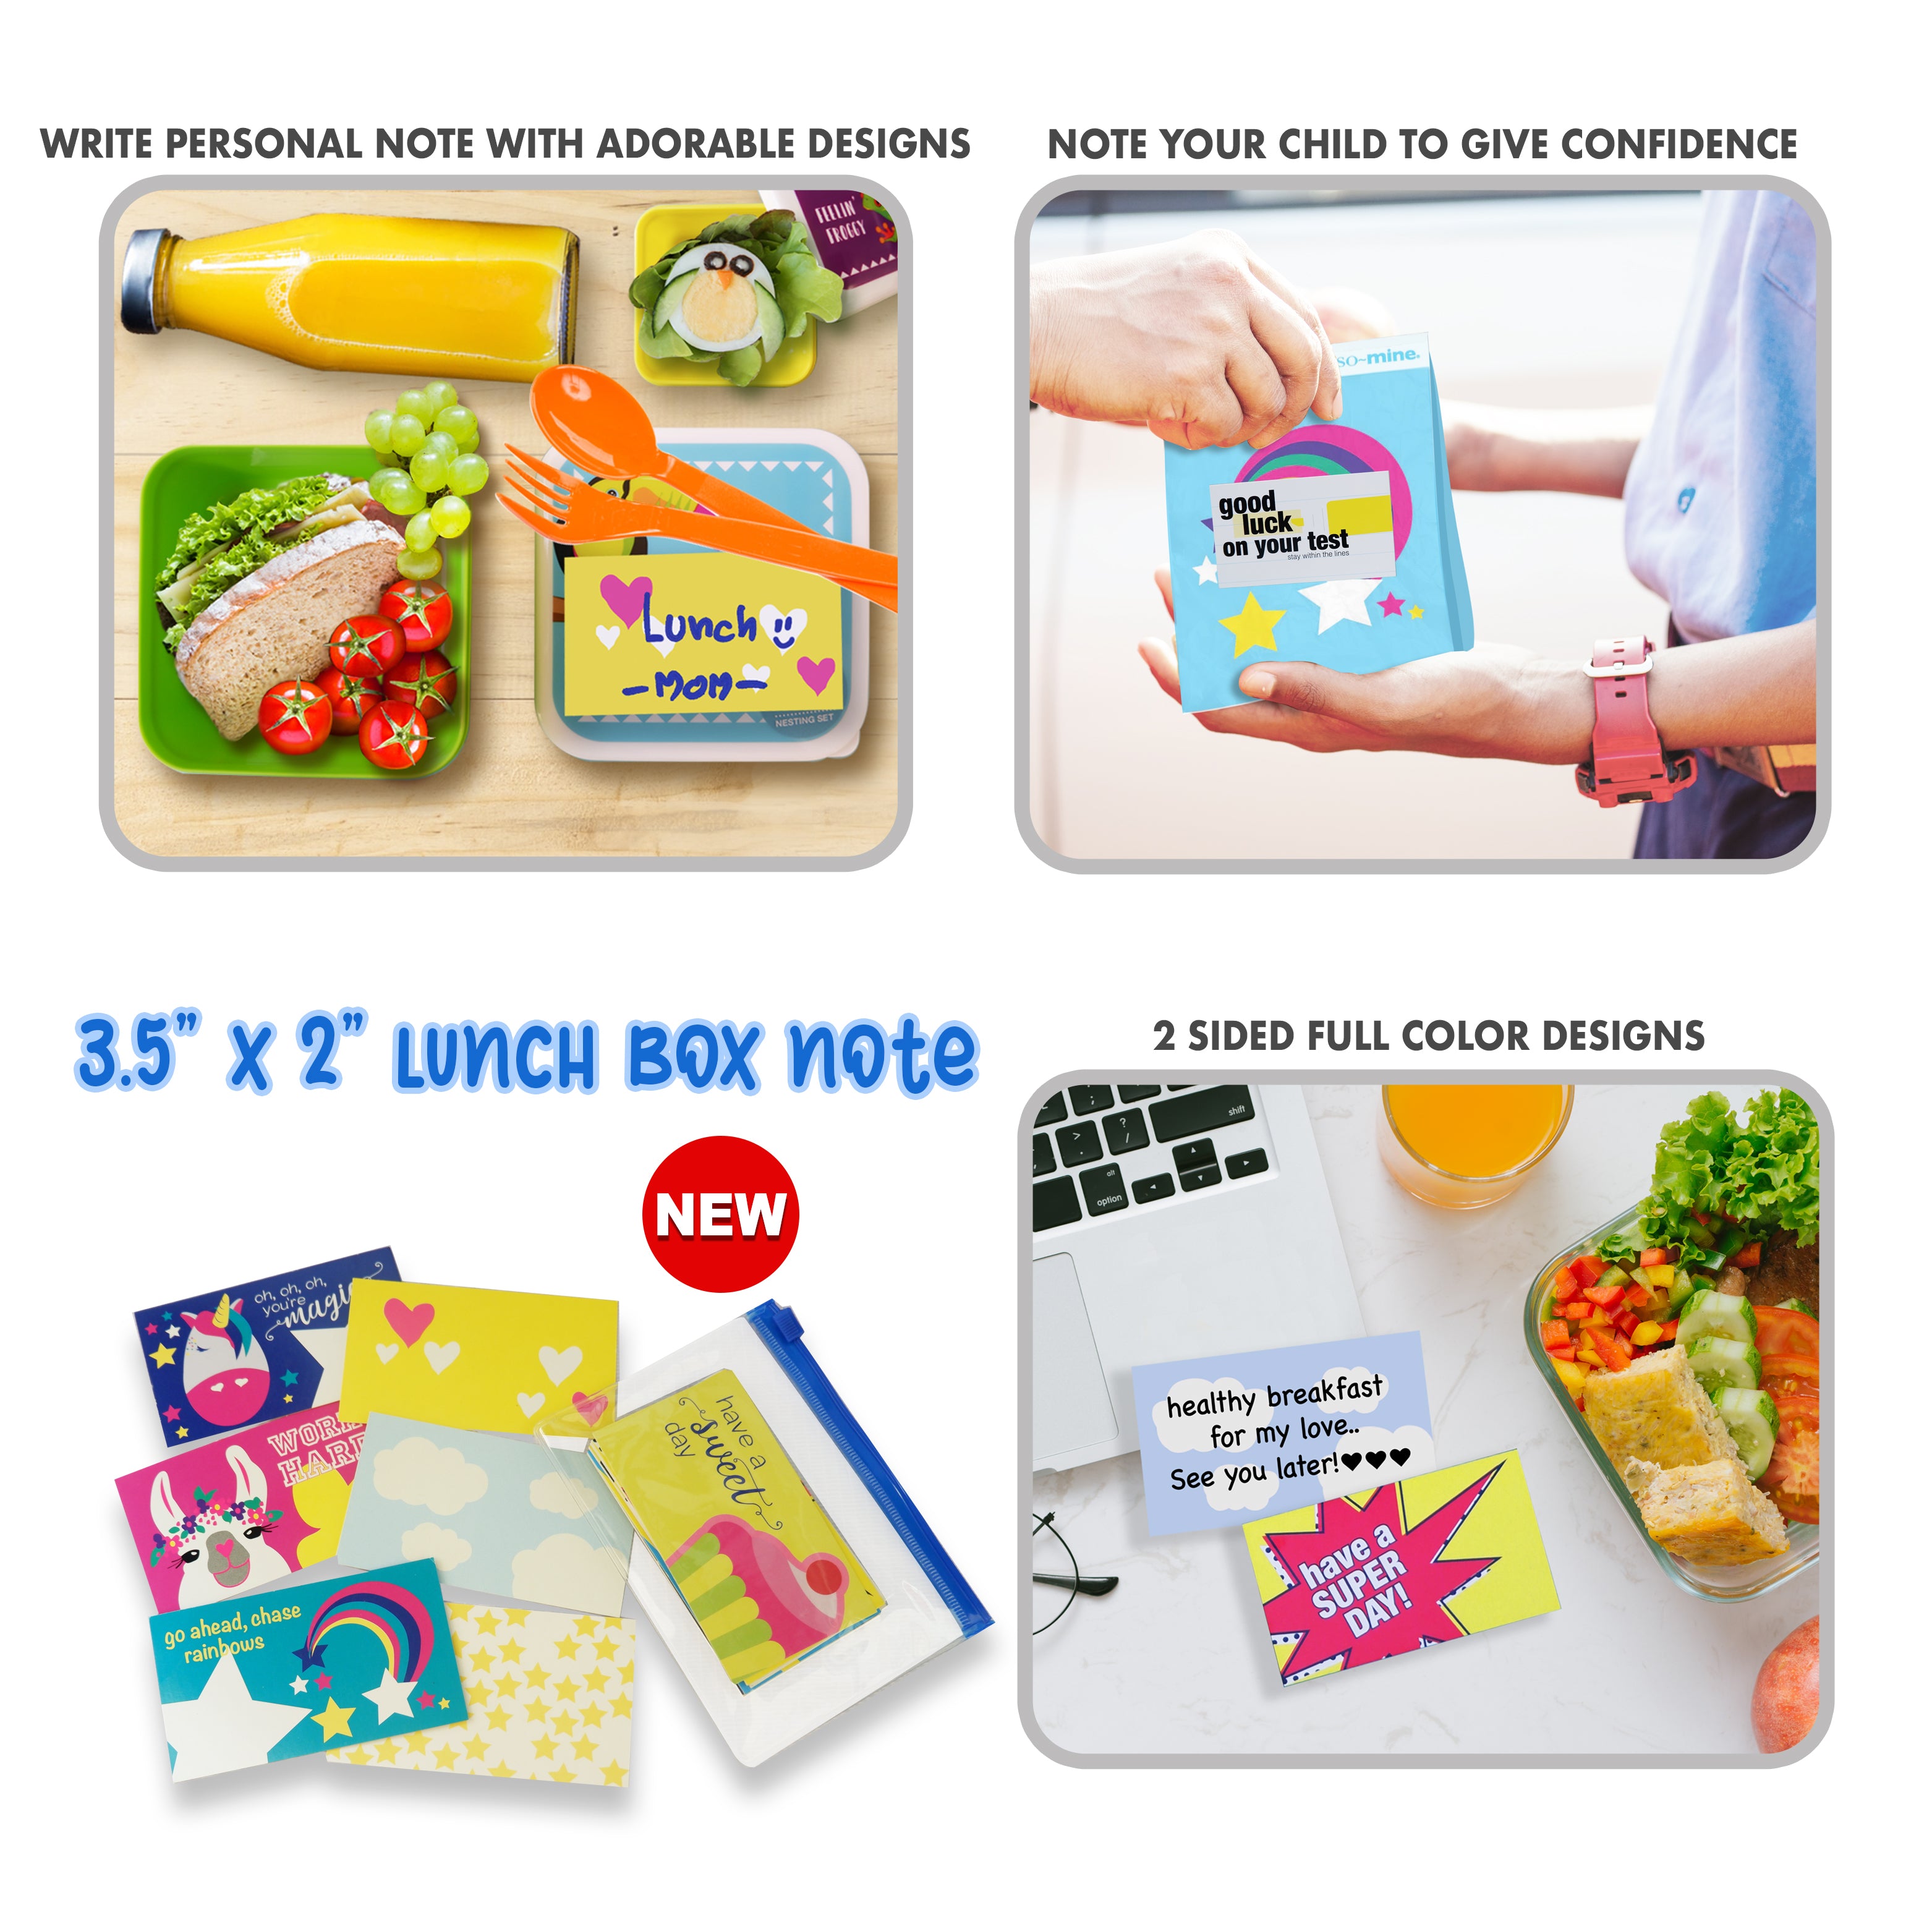 Lunch Box Notes-24 full color designs